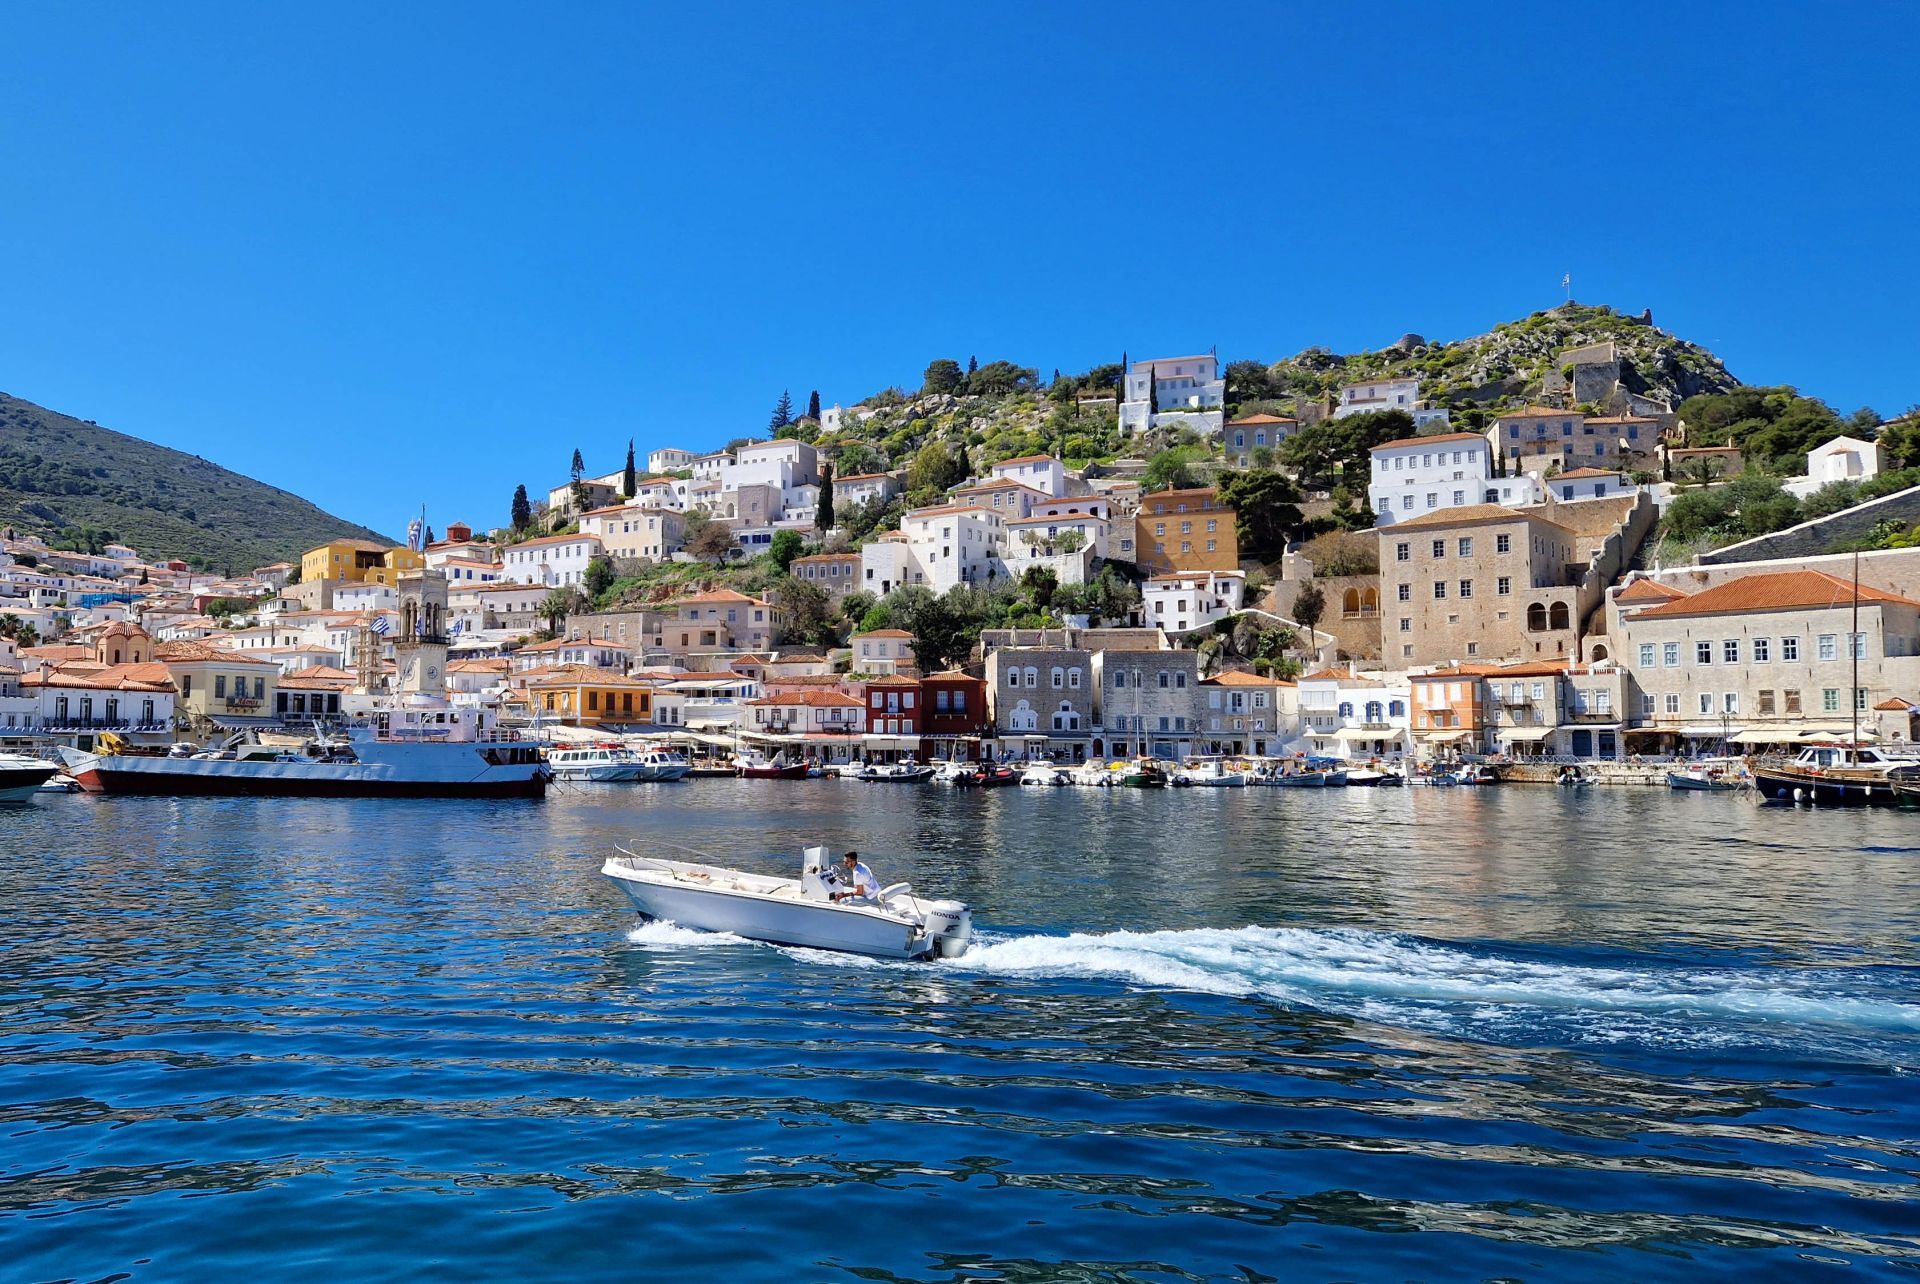 Hydra Greece: View of the port & Town